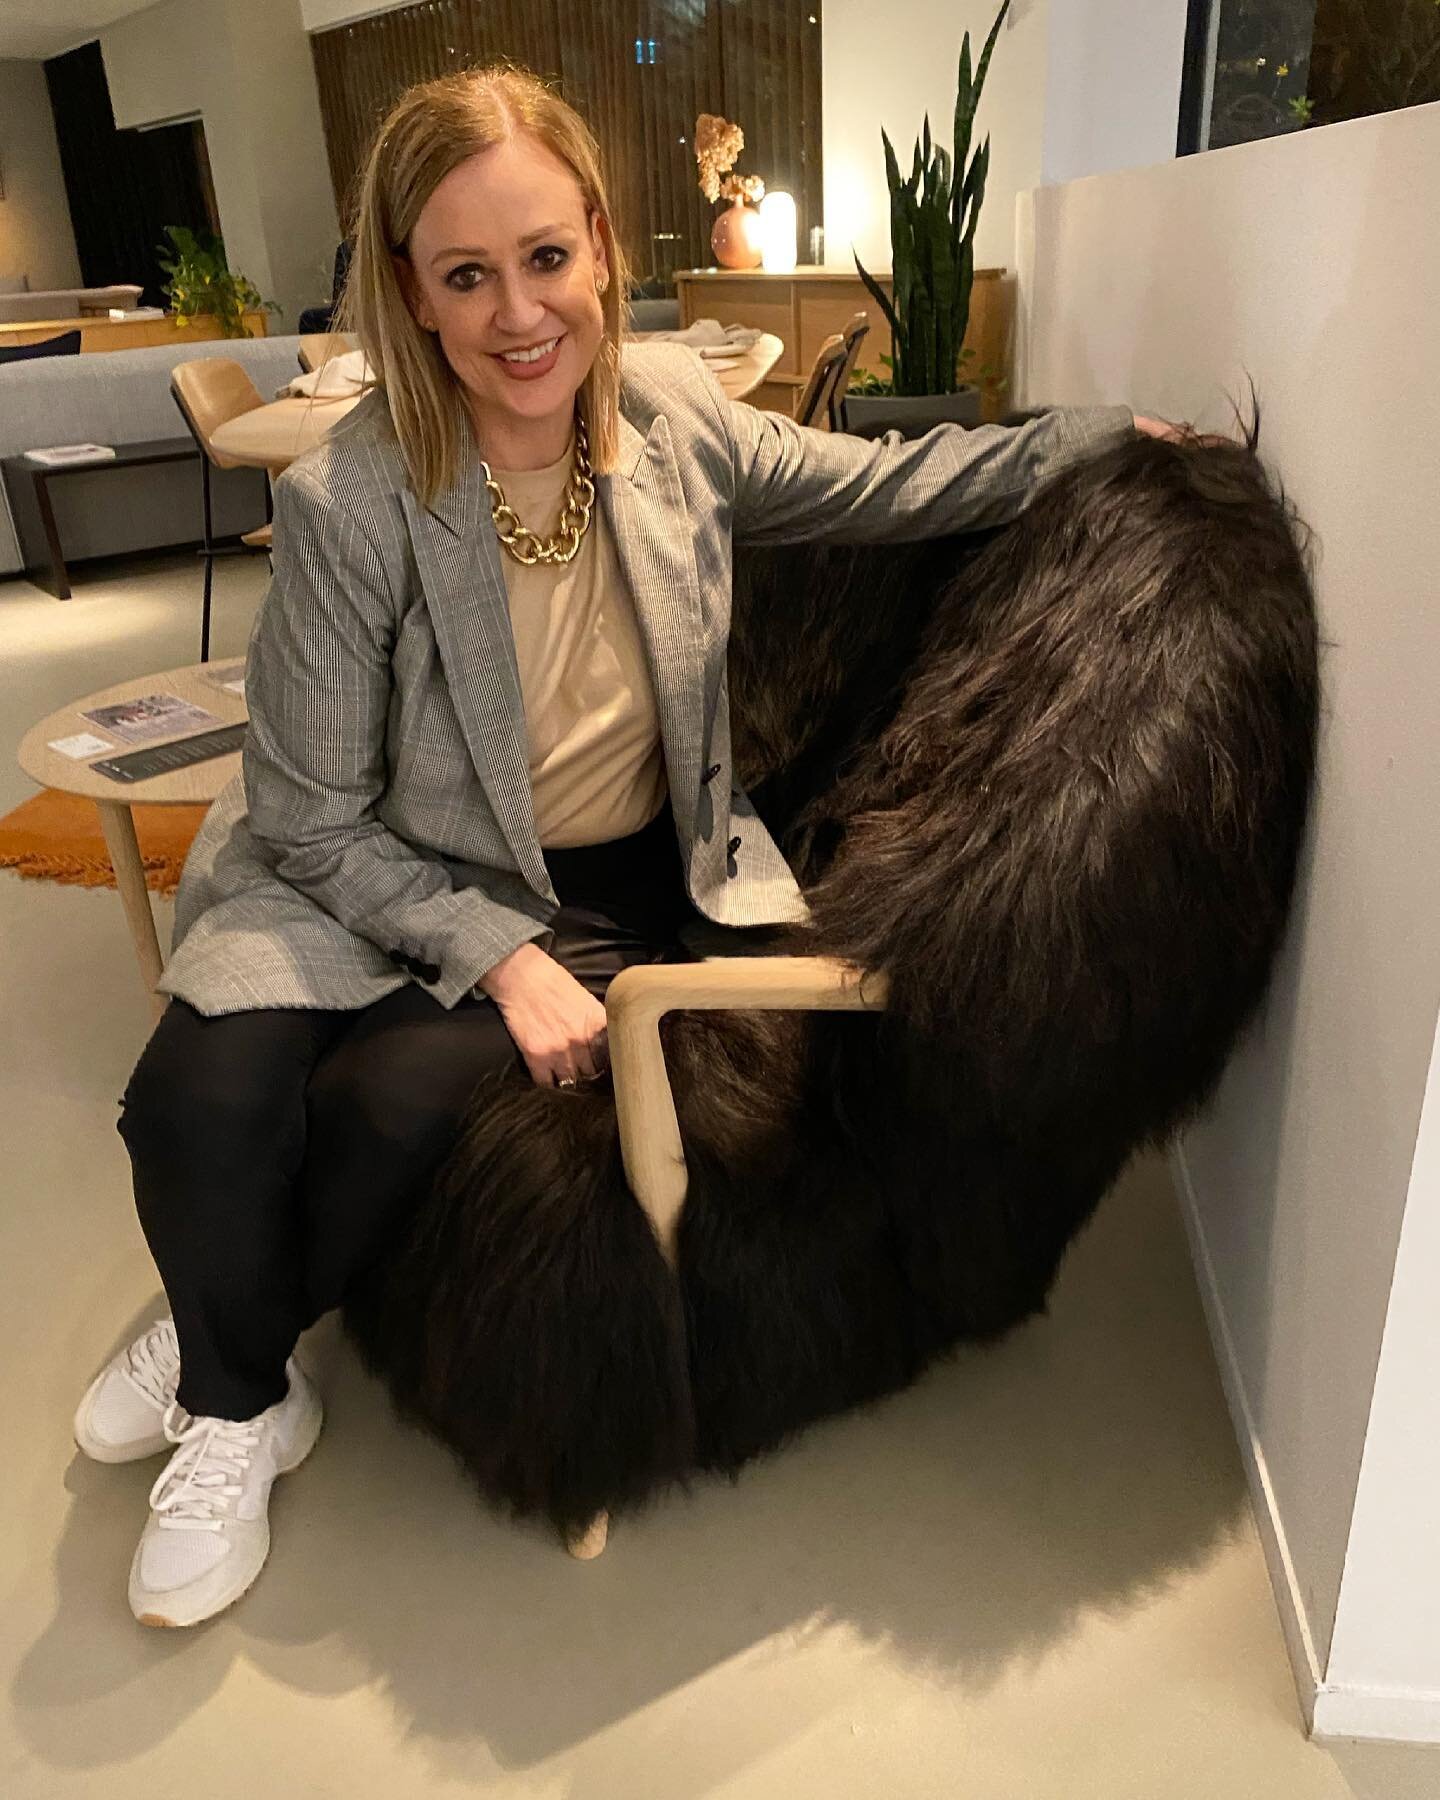 Serious Milano vibes tonight at the launch of @artemide_lighting and @stylecraftfurniture @stylecraft.home partnership. And &hellip; I got to test this #FluffyChair by @eikund_norway What more could a designer ask for?! Way too much fun - 6am Pilates